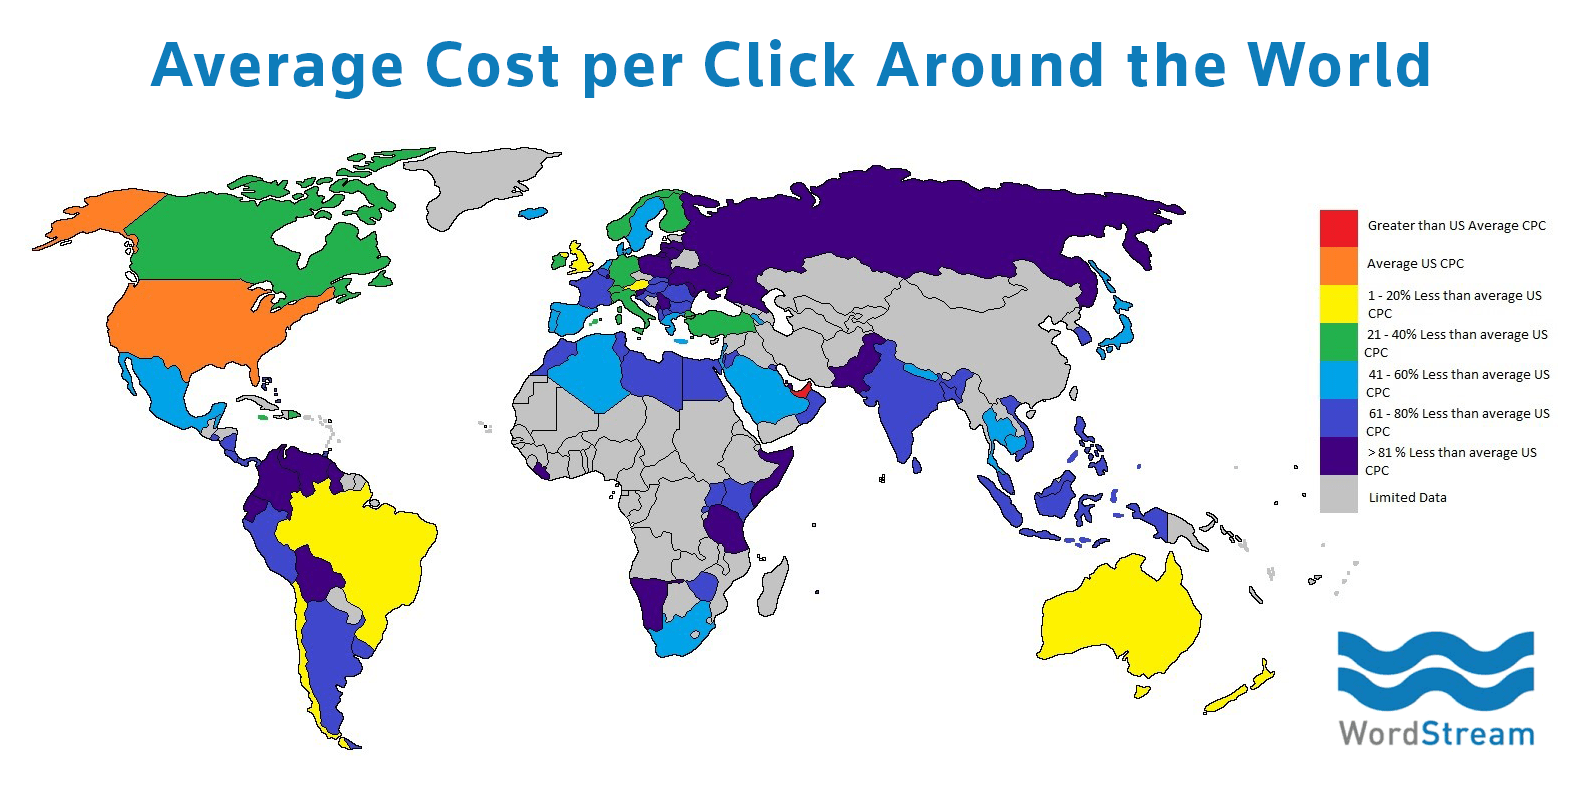 Average Cost per Click by Country: Where in the World Are the Highest CPCs?